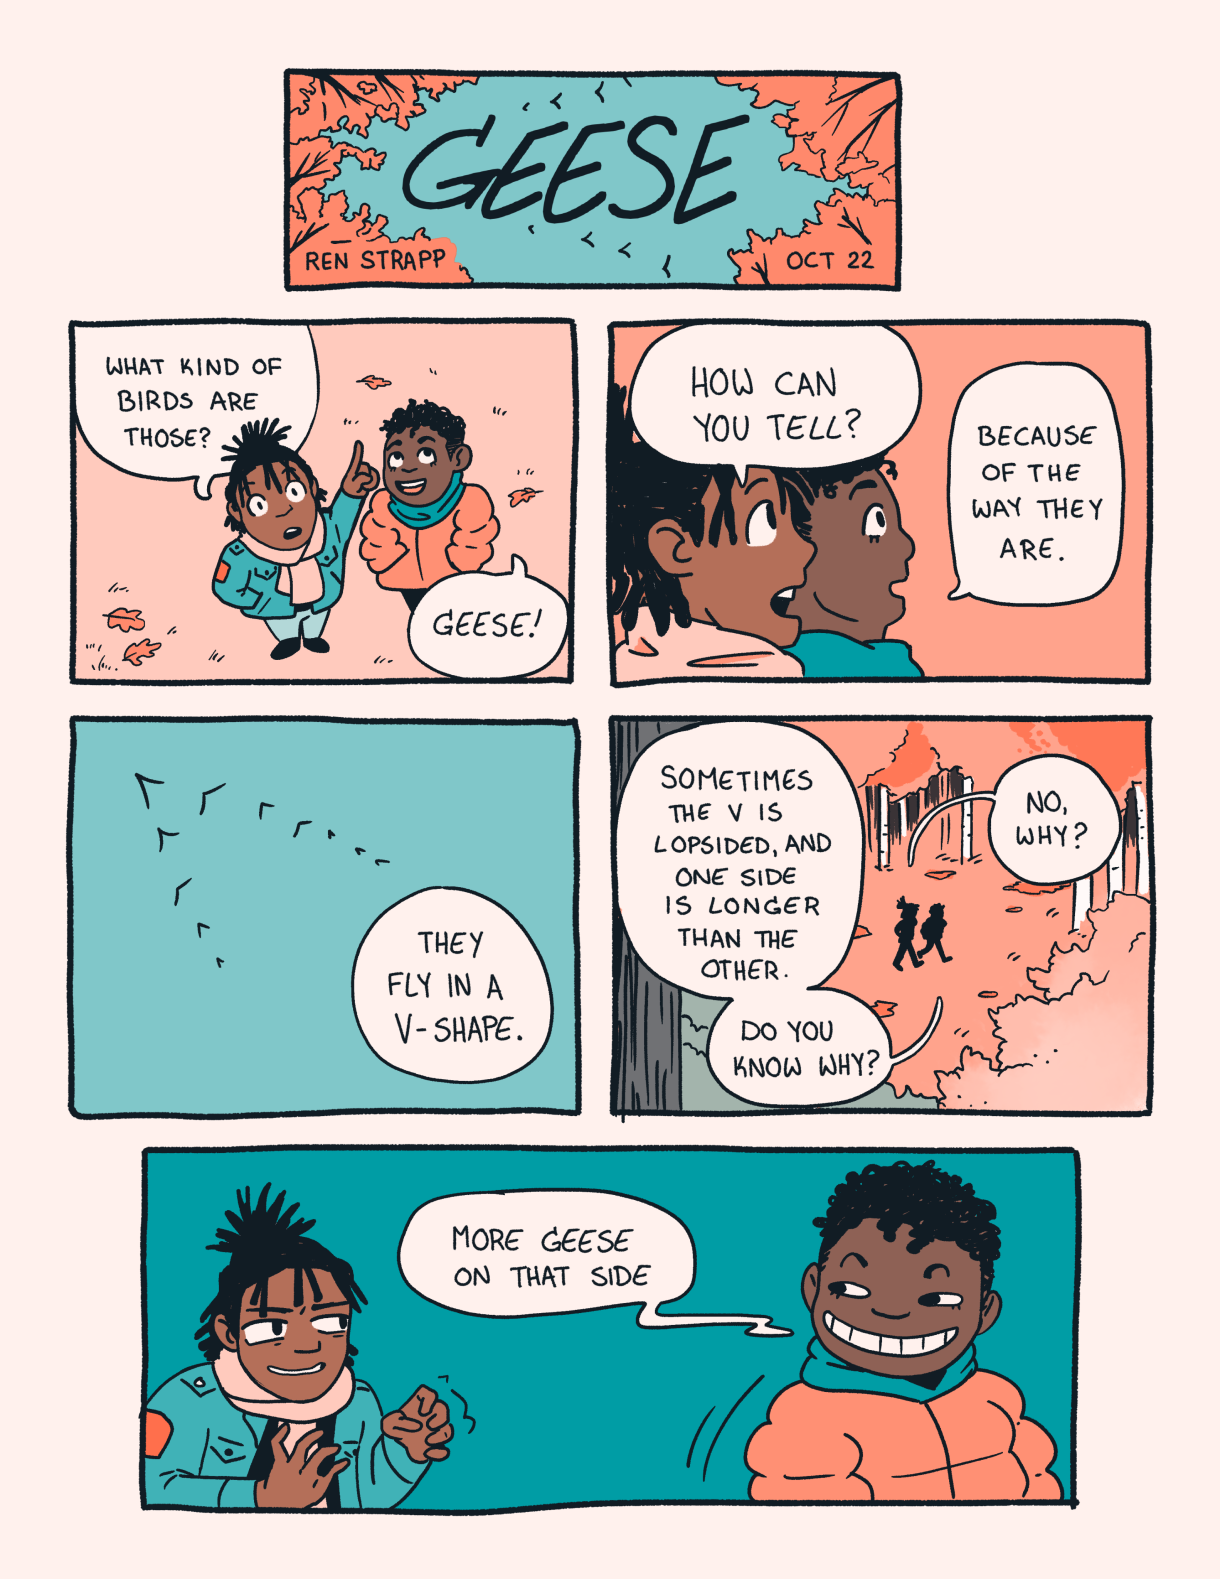 In a three panel comic the colors of dark and light peach and also turquoise, it says "Geese" in bold letters. Beneath it are two Black people, one person asks the other what type of bird they are looking at. The answer is "Geese." The first person asks, how can you tell? The answer is because they fly in a V shape. The explanation continues, sometimes the V is lopsided and one side is longer than the other. Do you know why? The first person asks "why" expecting there's a fancy answer. But no! Just "more geese on that side"